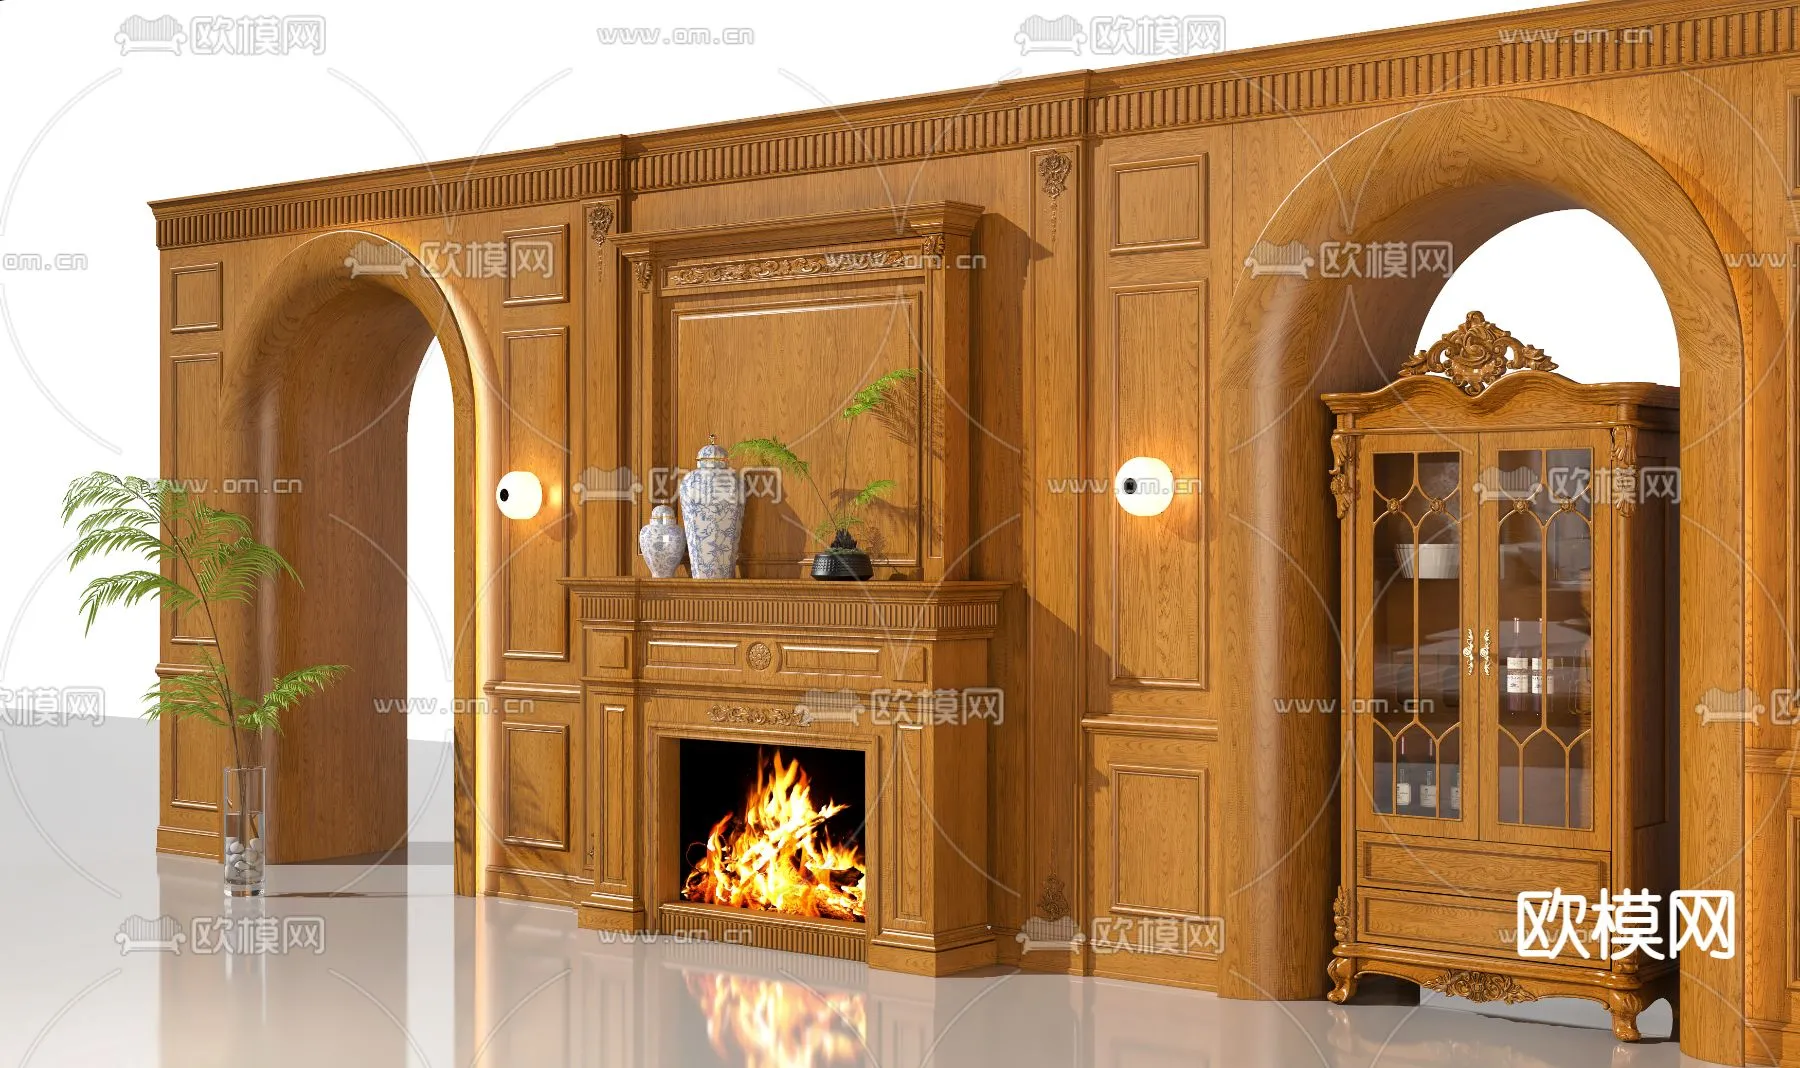 CLASSIC – FIREPLACE 3DMODELS – 093